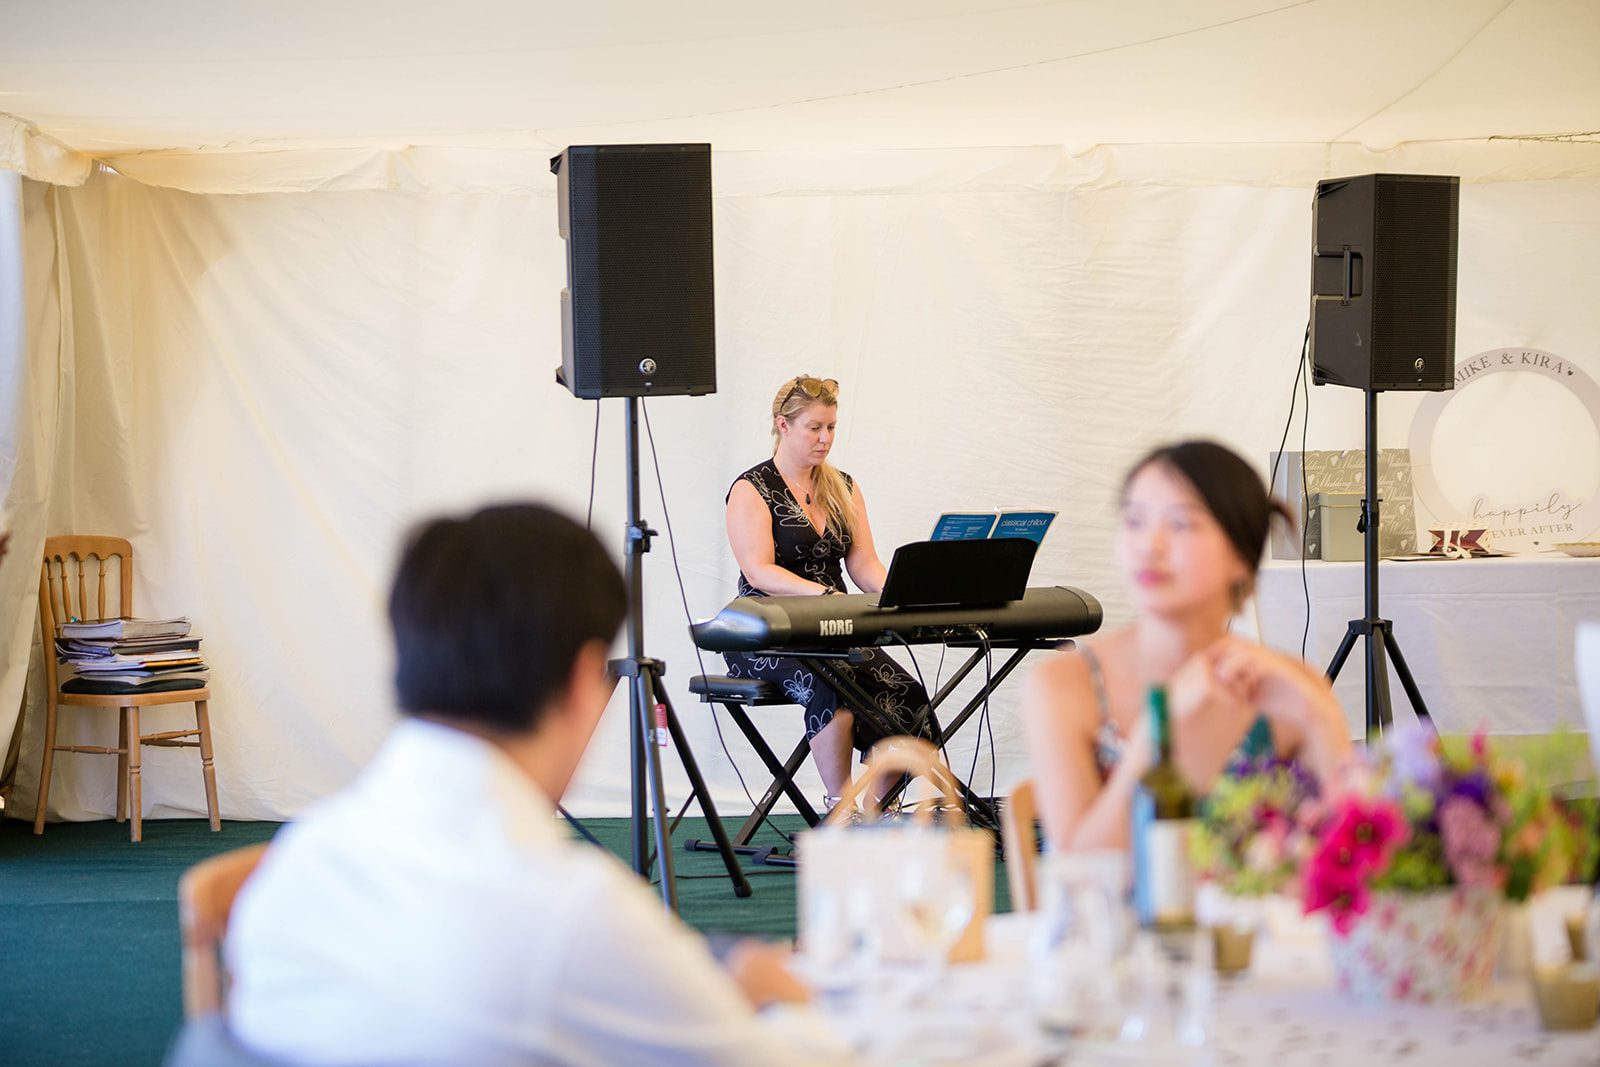 A photograph of a woman playing a piano at a wedding reception.